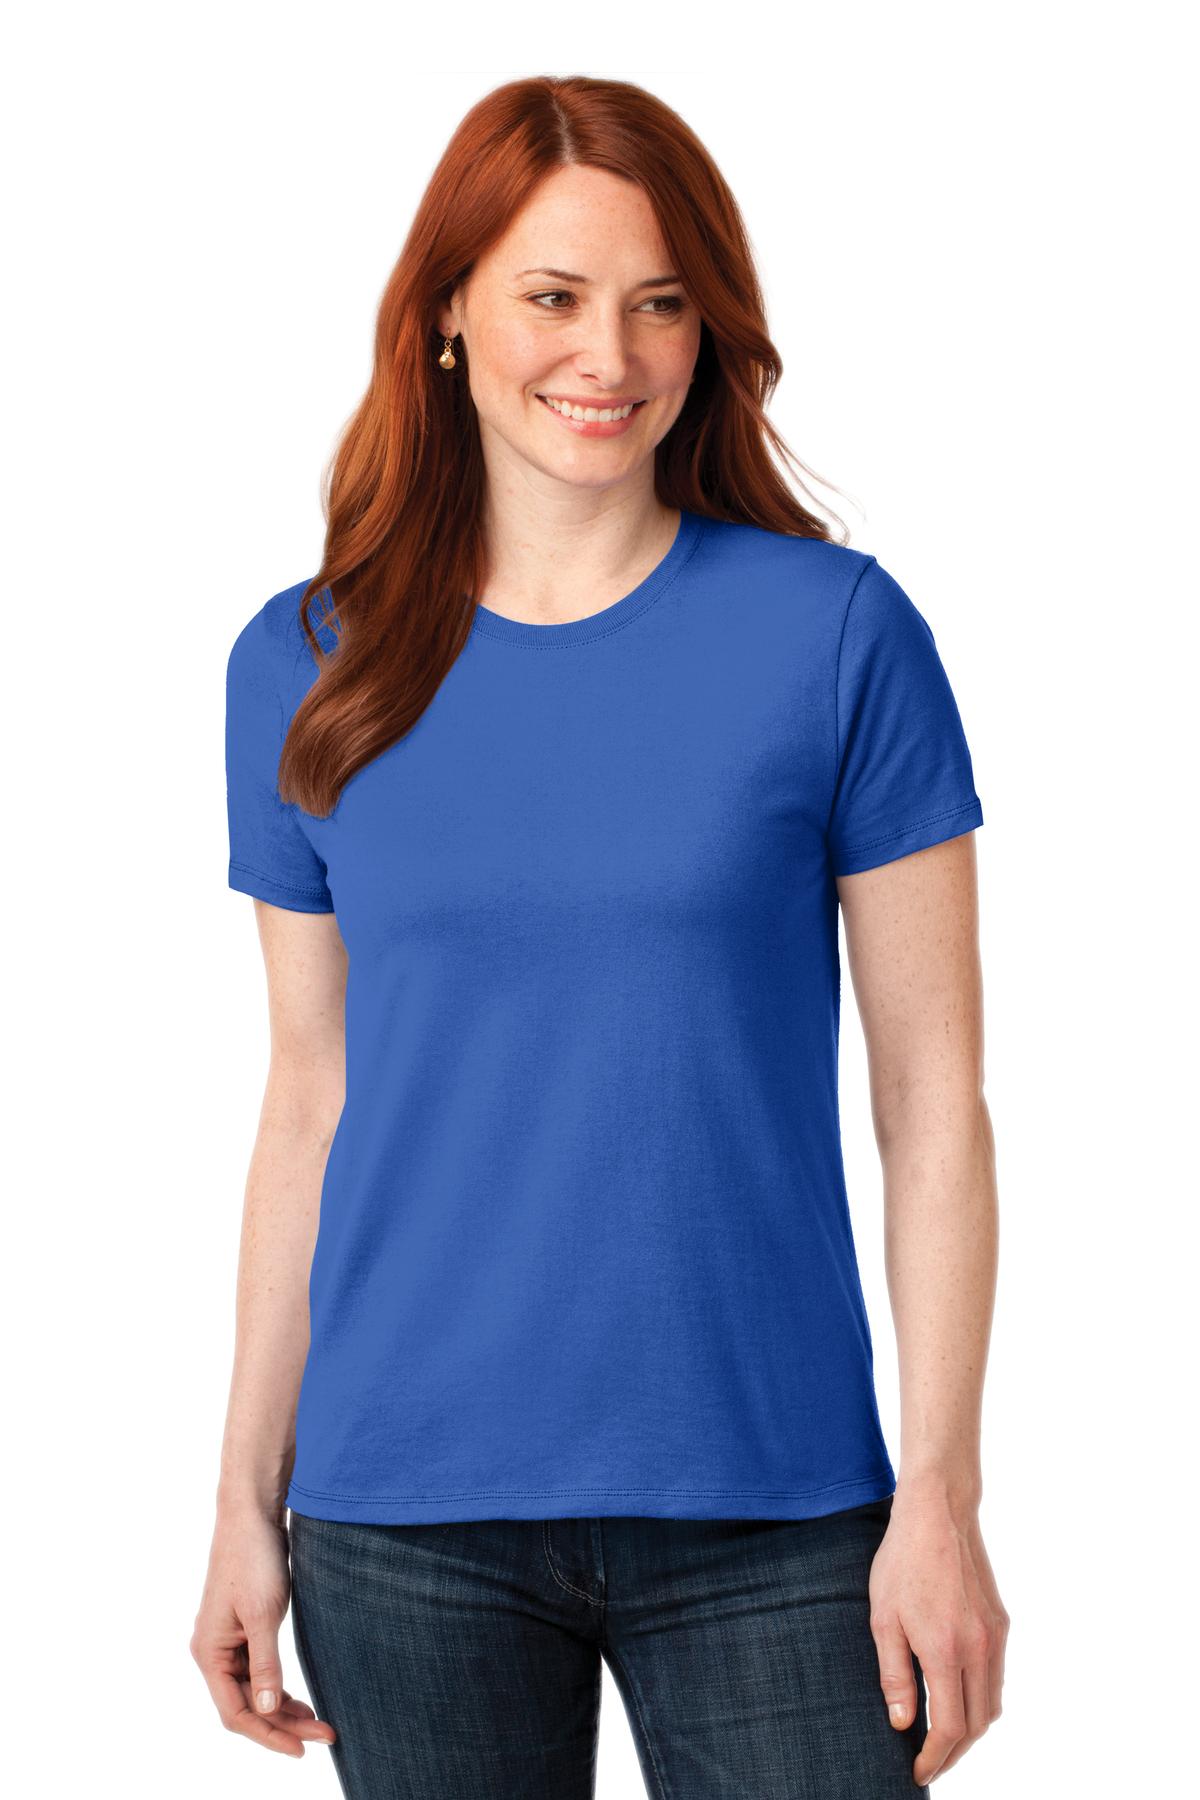 Buy Port & Company® Ladies Core Blend Tee. - Port & Company Online at ...